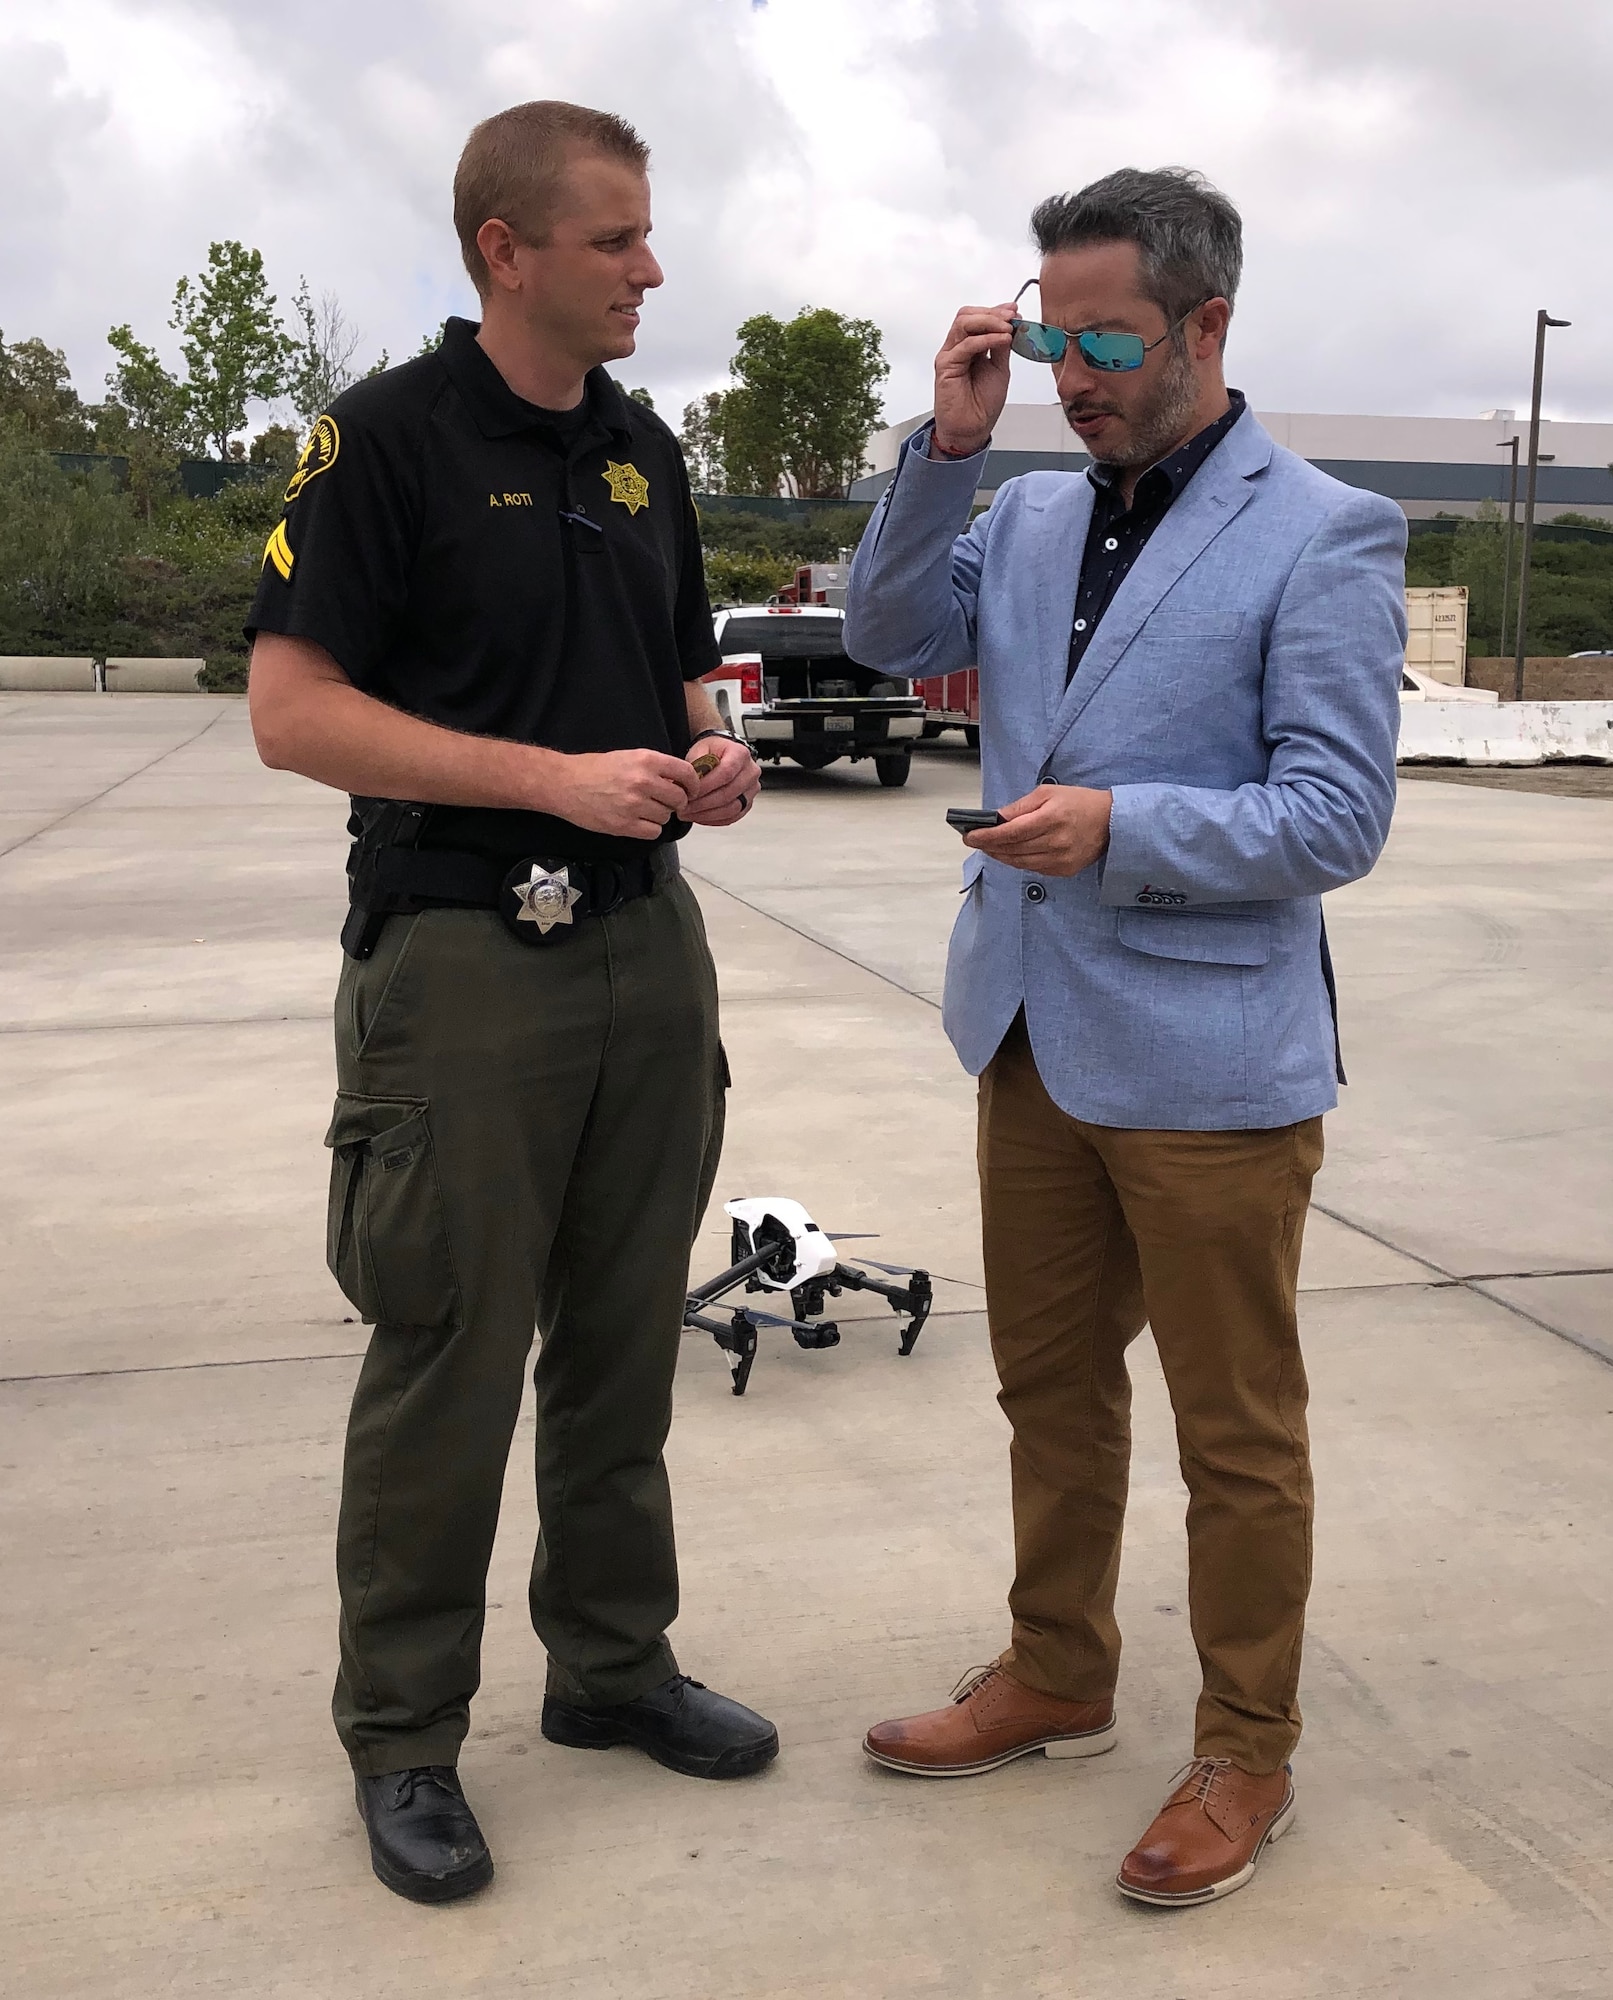 San Diego Sheriff Department Deputy Alex Roti and Comisario Gerardo Andres Valenzuela, Policia de Investigaciones (PDI) Santiago, Chile, flank a drone during the first Unmanned Aerial Systems Seminar in California hosted by AFOSI FPD, Chile, May 20-24, 2019. (Photo submitted by SA Carlos Vargas, FPD, Chile)